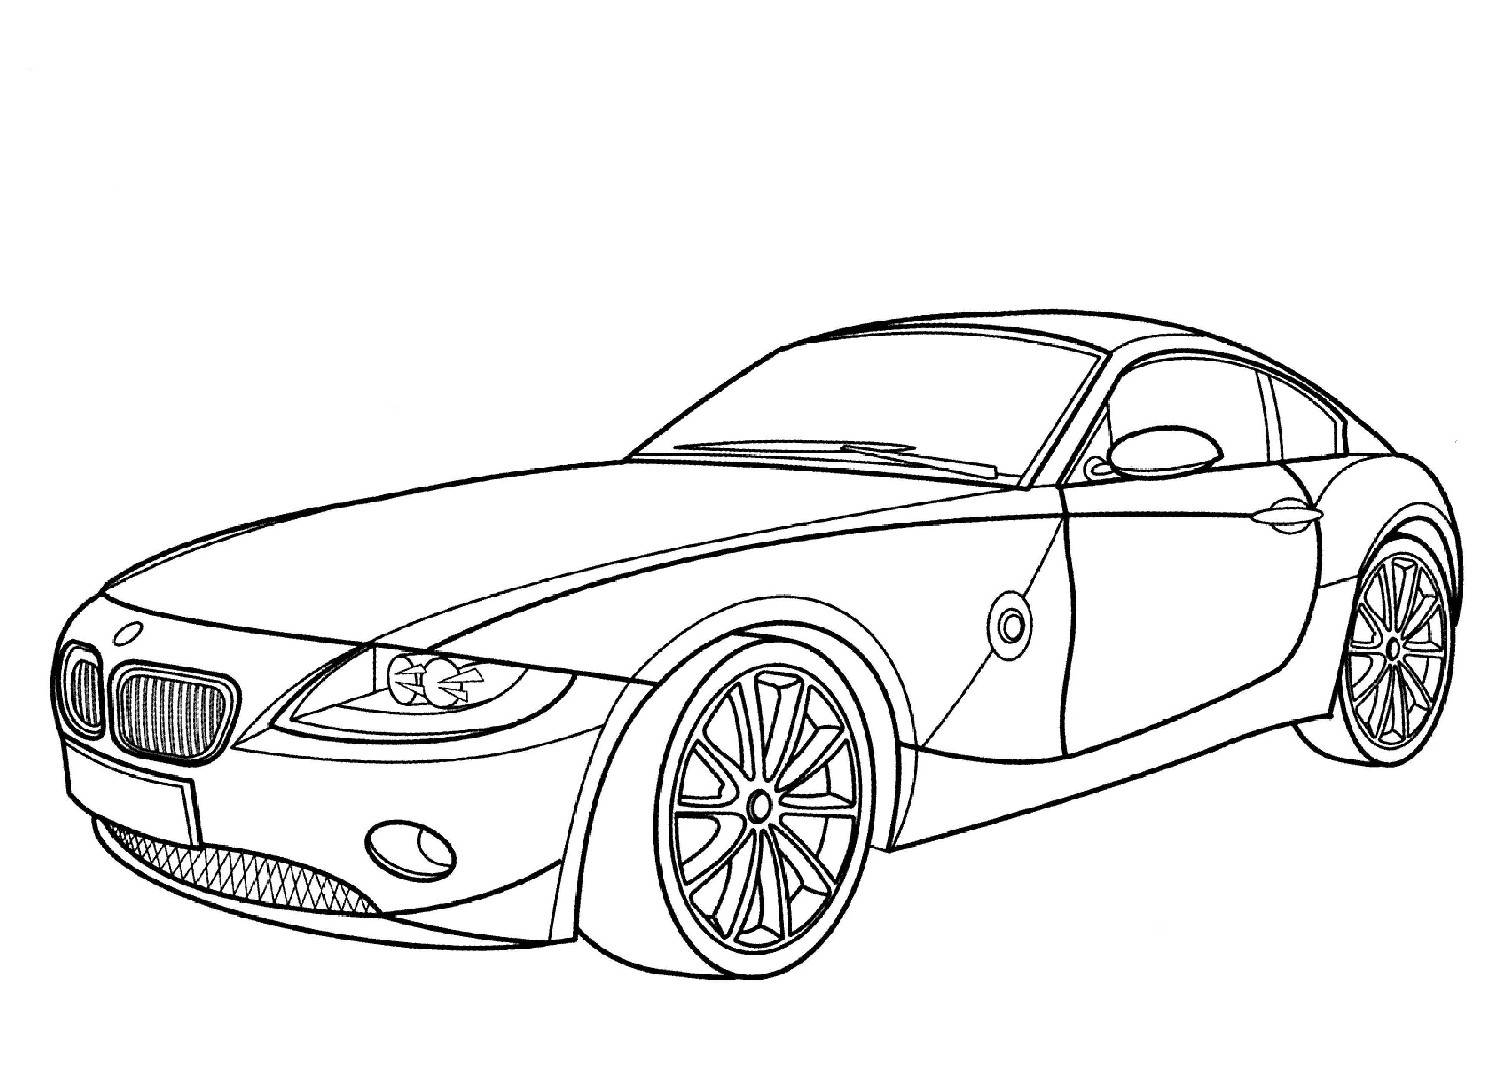  Racing BMW Car Pictures to Color Printable Coloring Pages for Kids